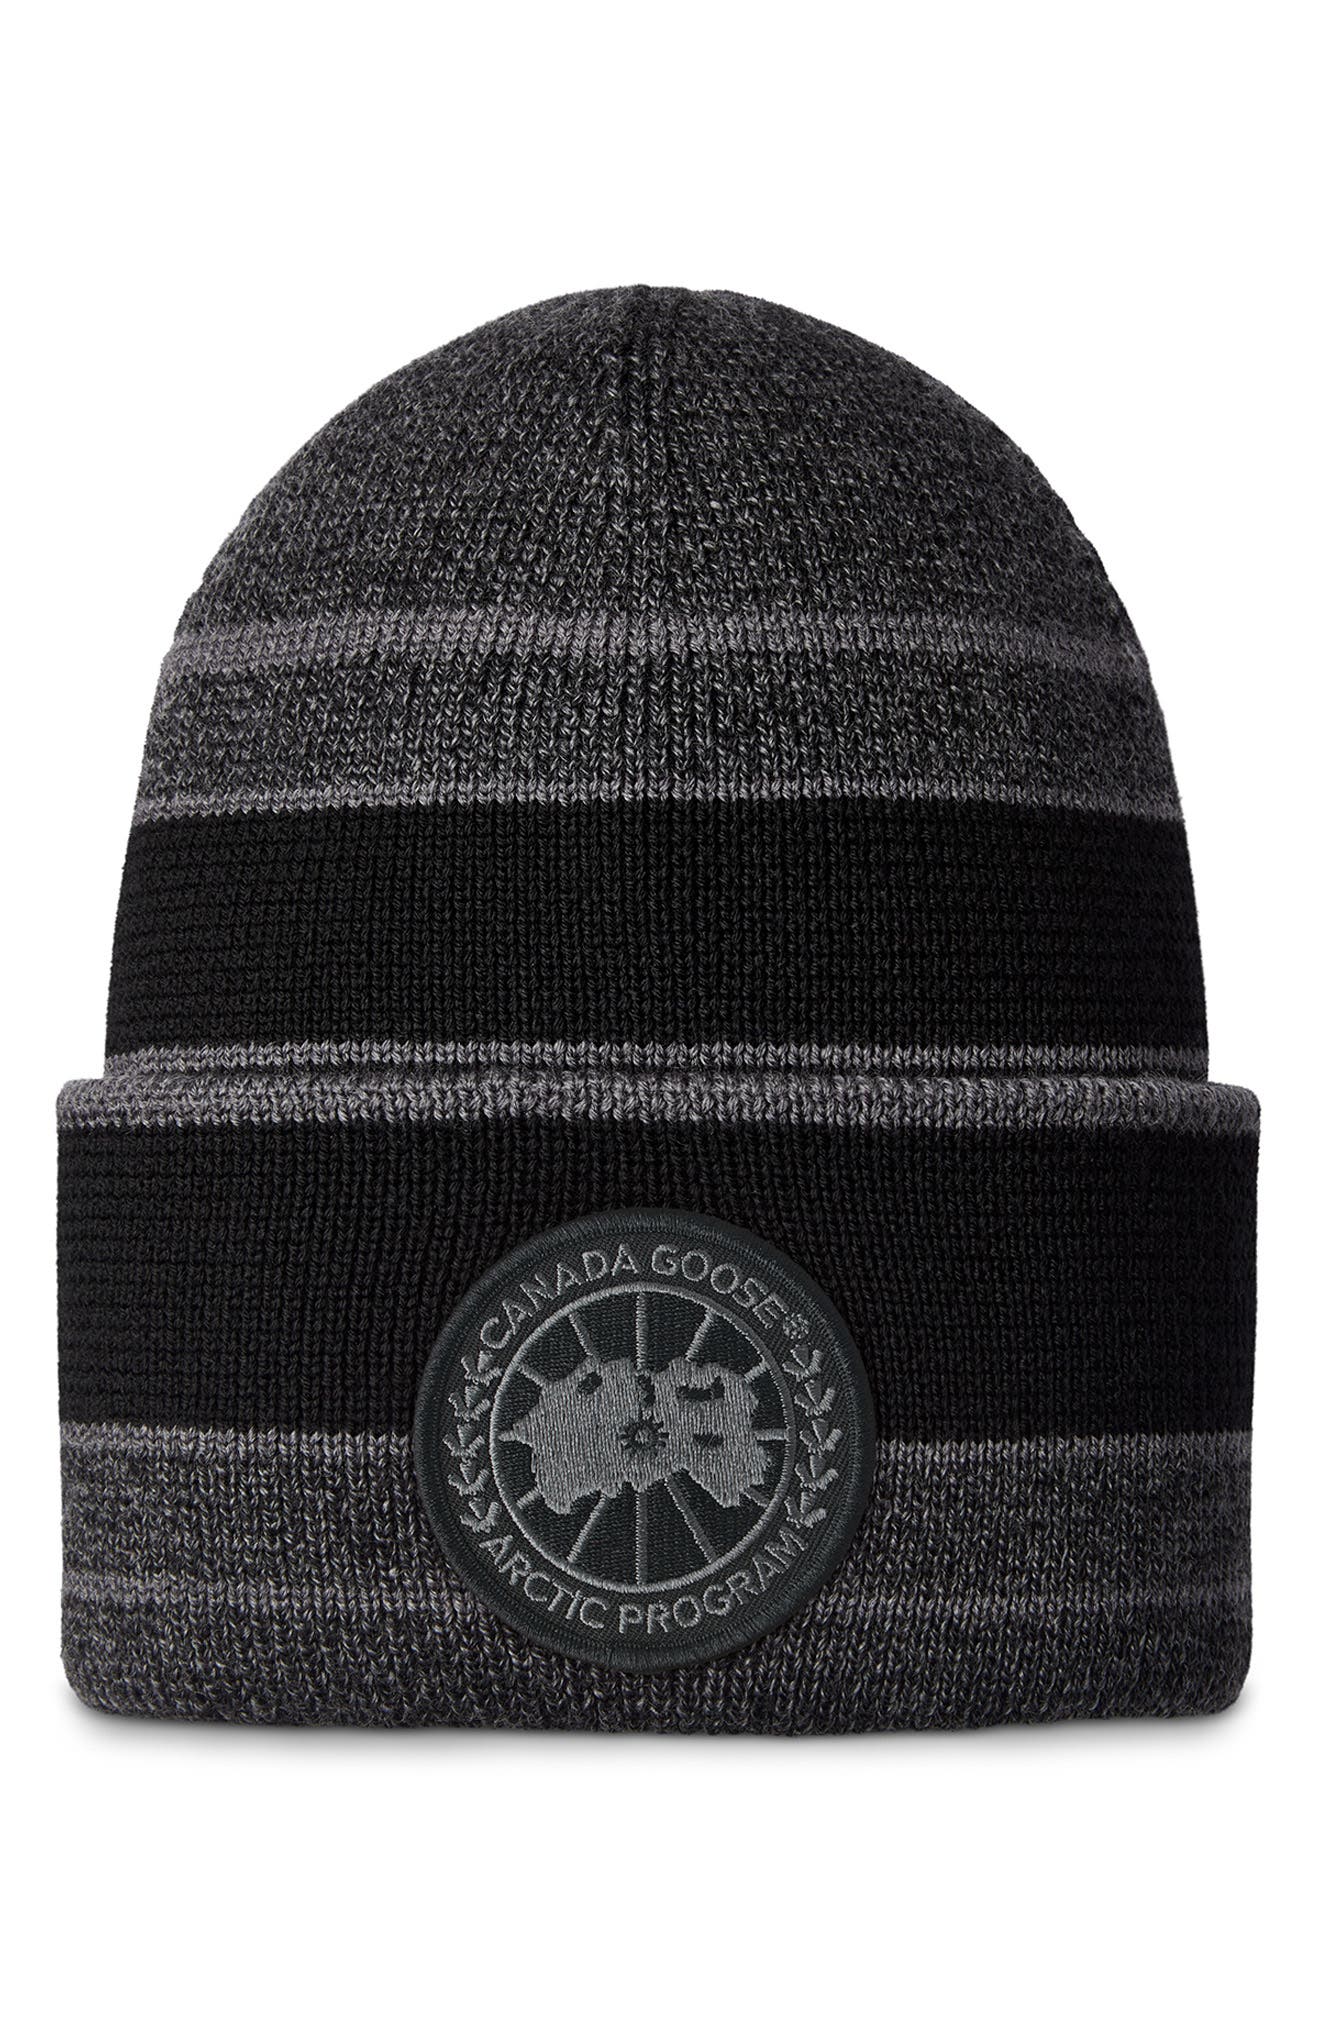 Canada Goose Wool Arctic Black Beanie for Men Save 55% Mens Hats Canada Goose Hats 